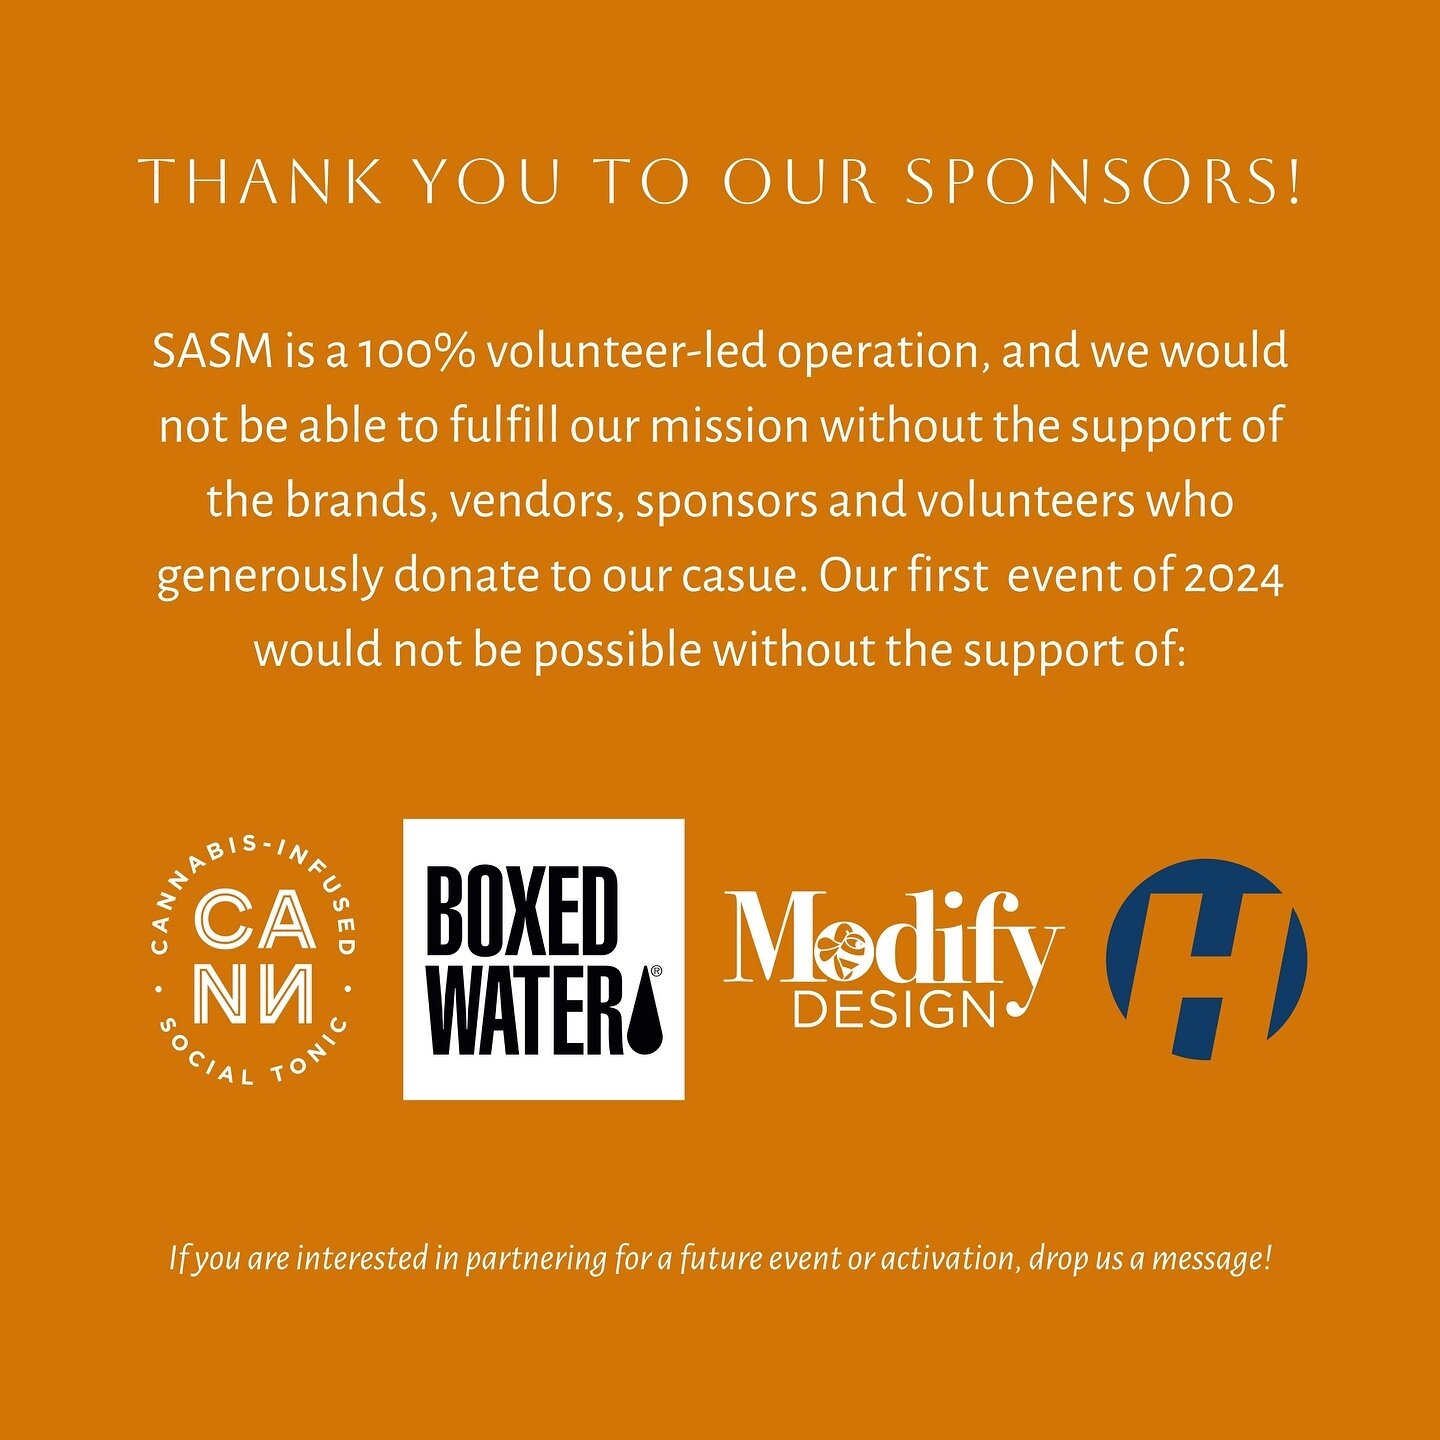 SASM is a 100% volunteer-led operation, and we would not be able to fulfill our mission and produce meaningful community events without the support and kindness of the brands, vendors, sponsors, and volunteers who generously donate to our cause. We a